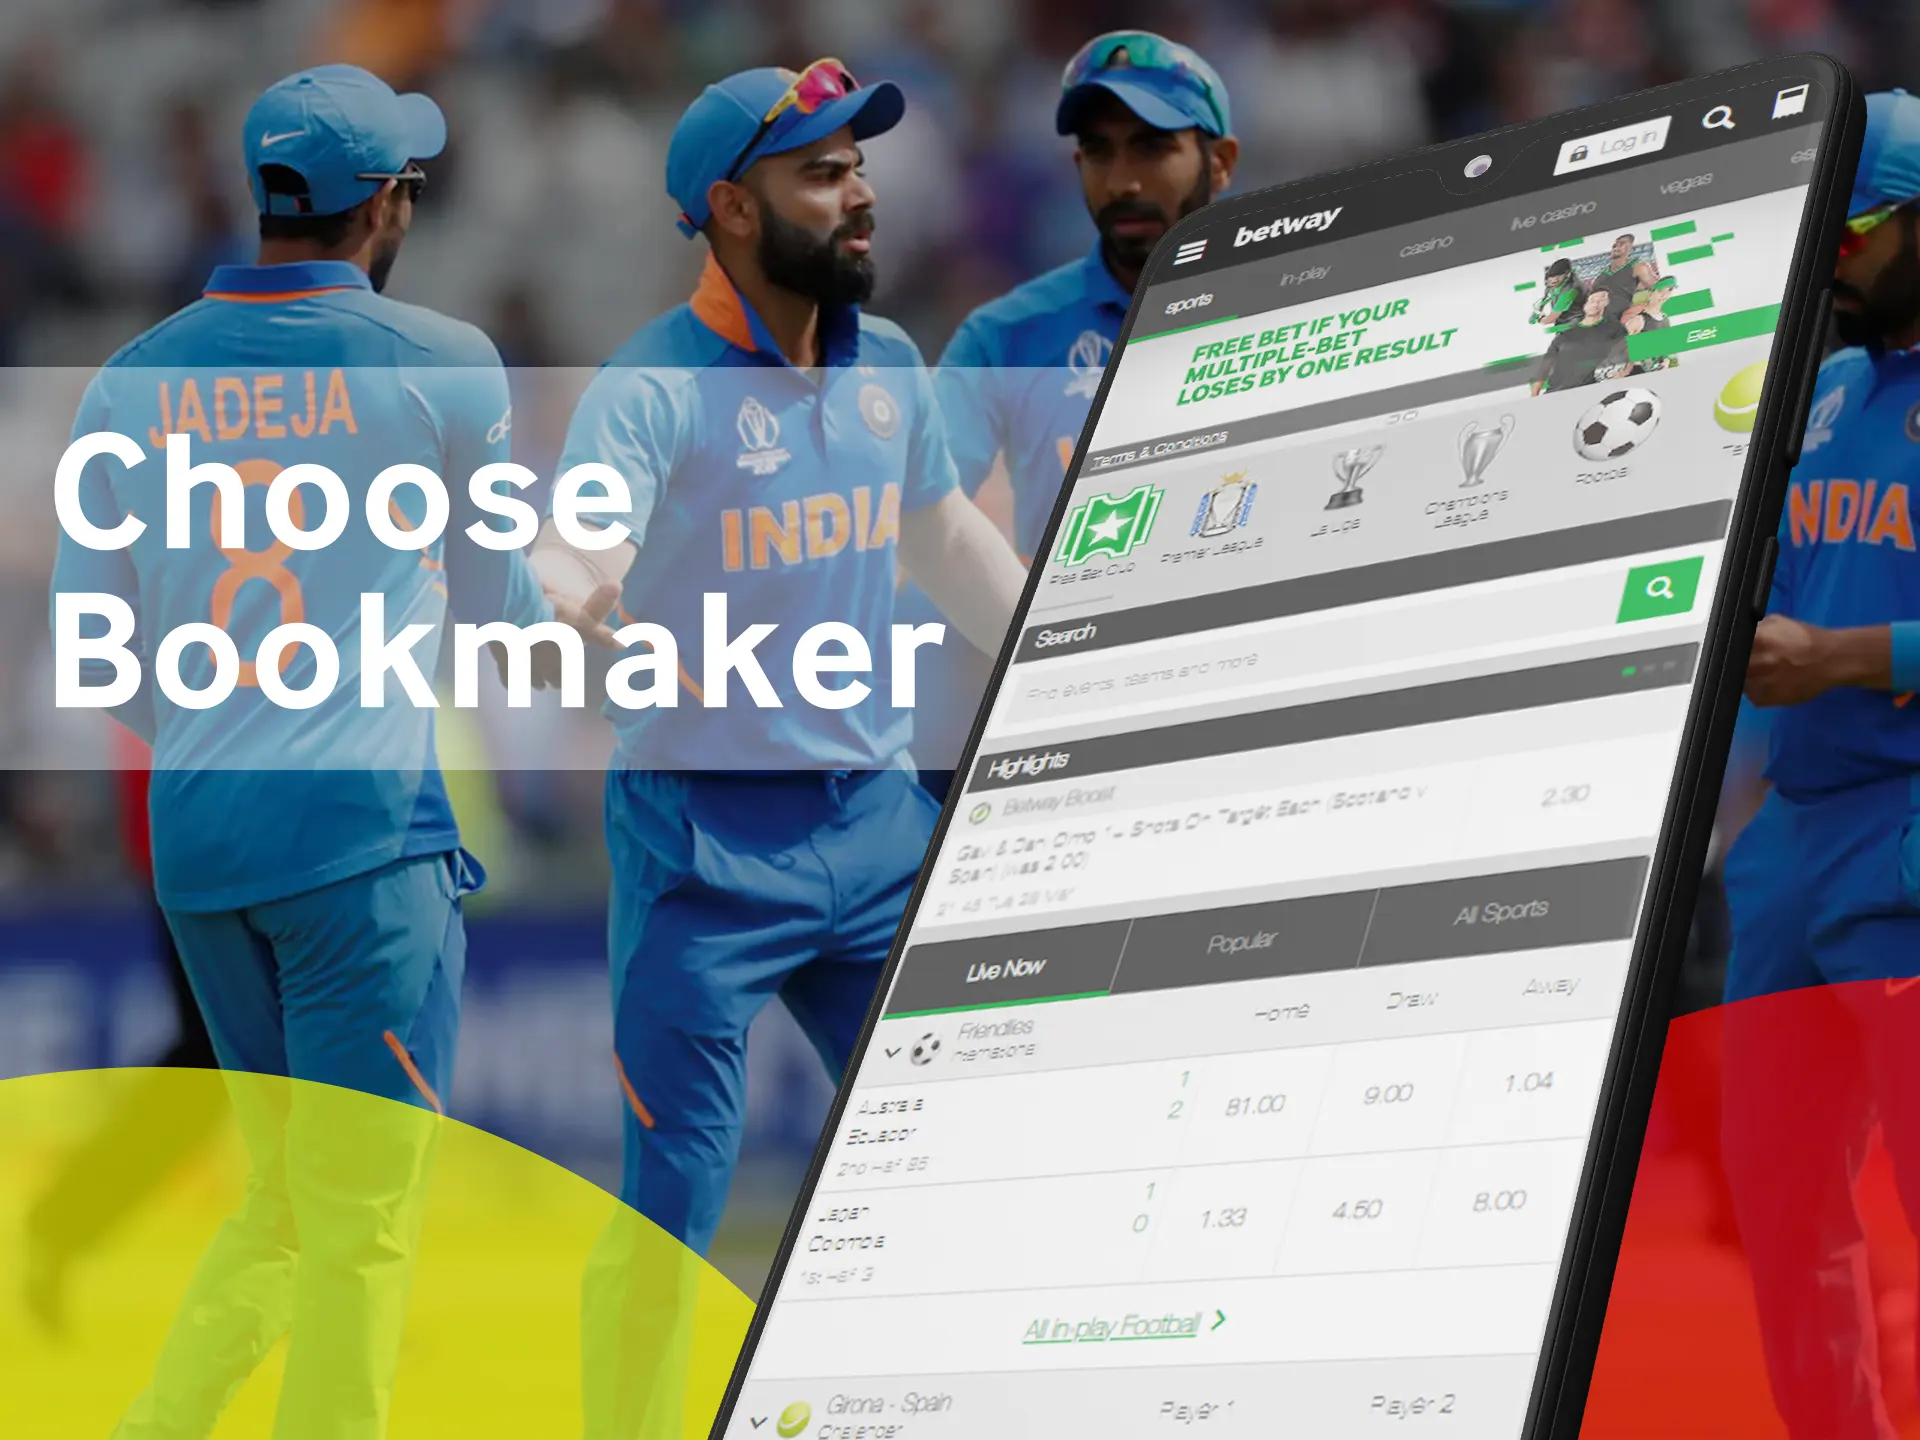 How to choose a bookmaker for online cricket betting in India